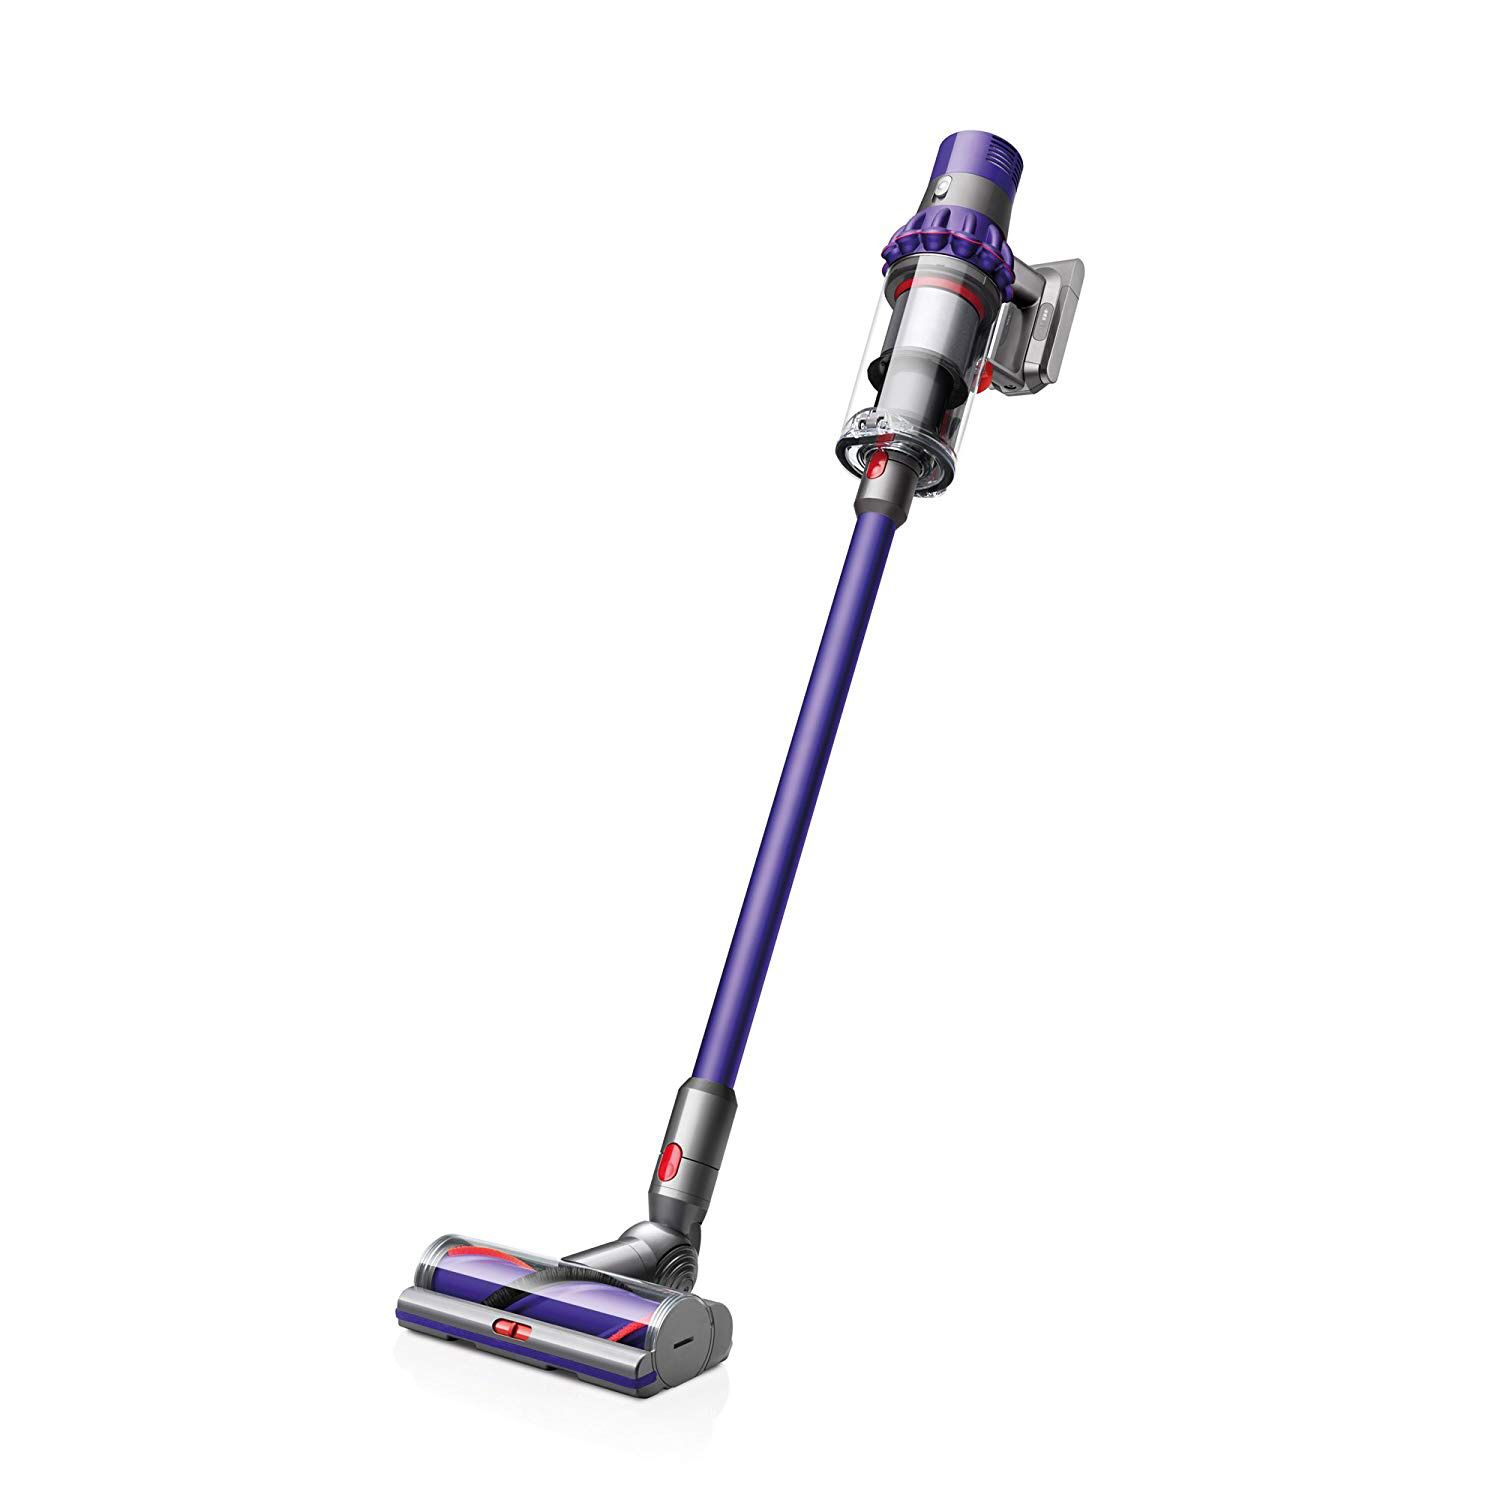 NEW Dyson cyclone V 10 animal lightweight Cordless vacuum cleaner